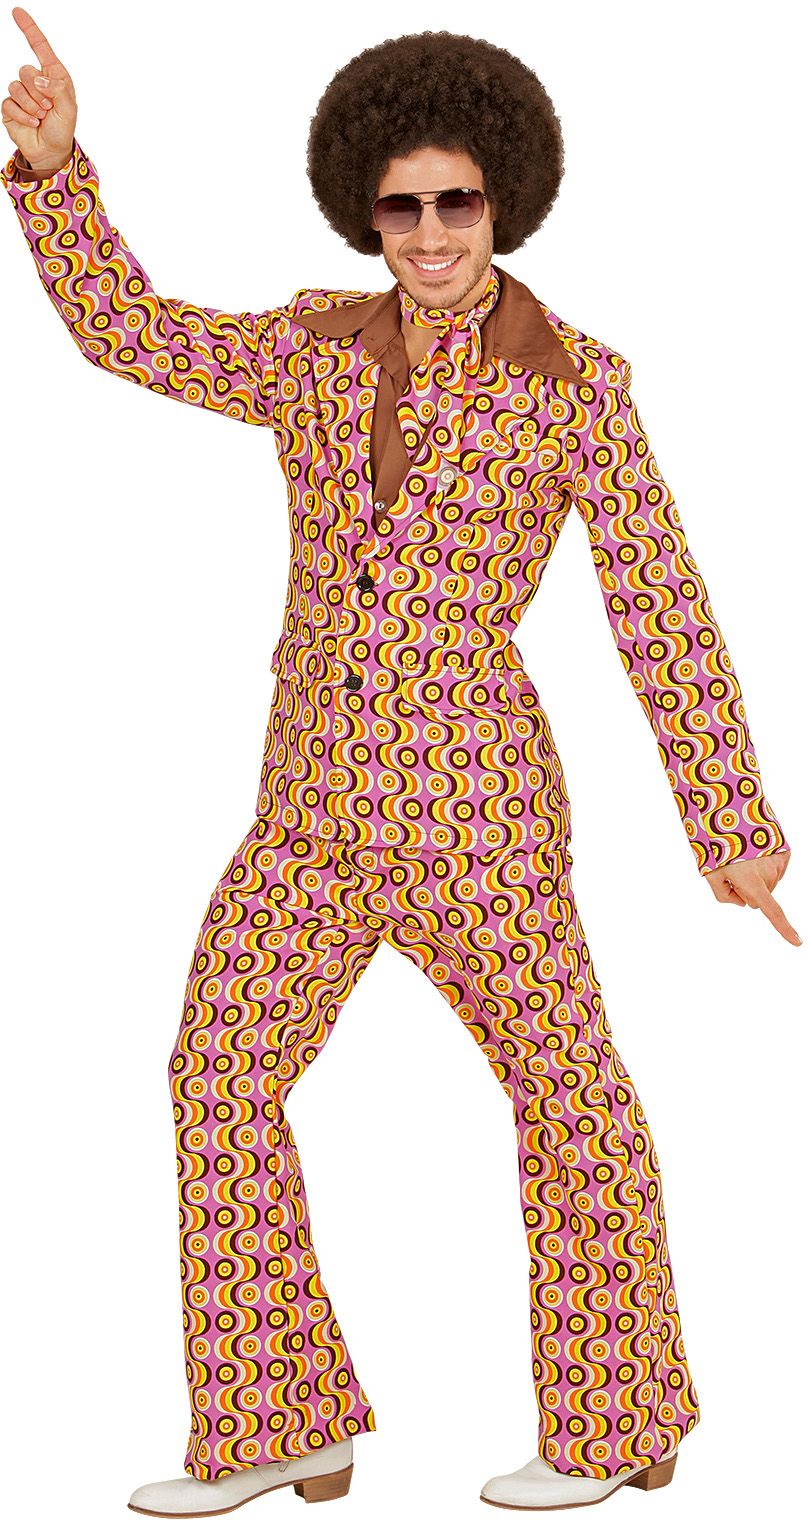 Groovy 70s outfit